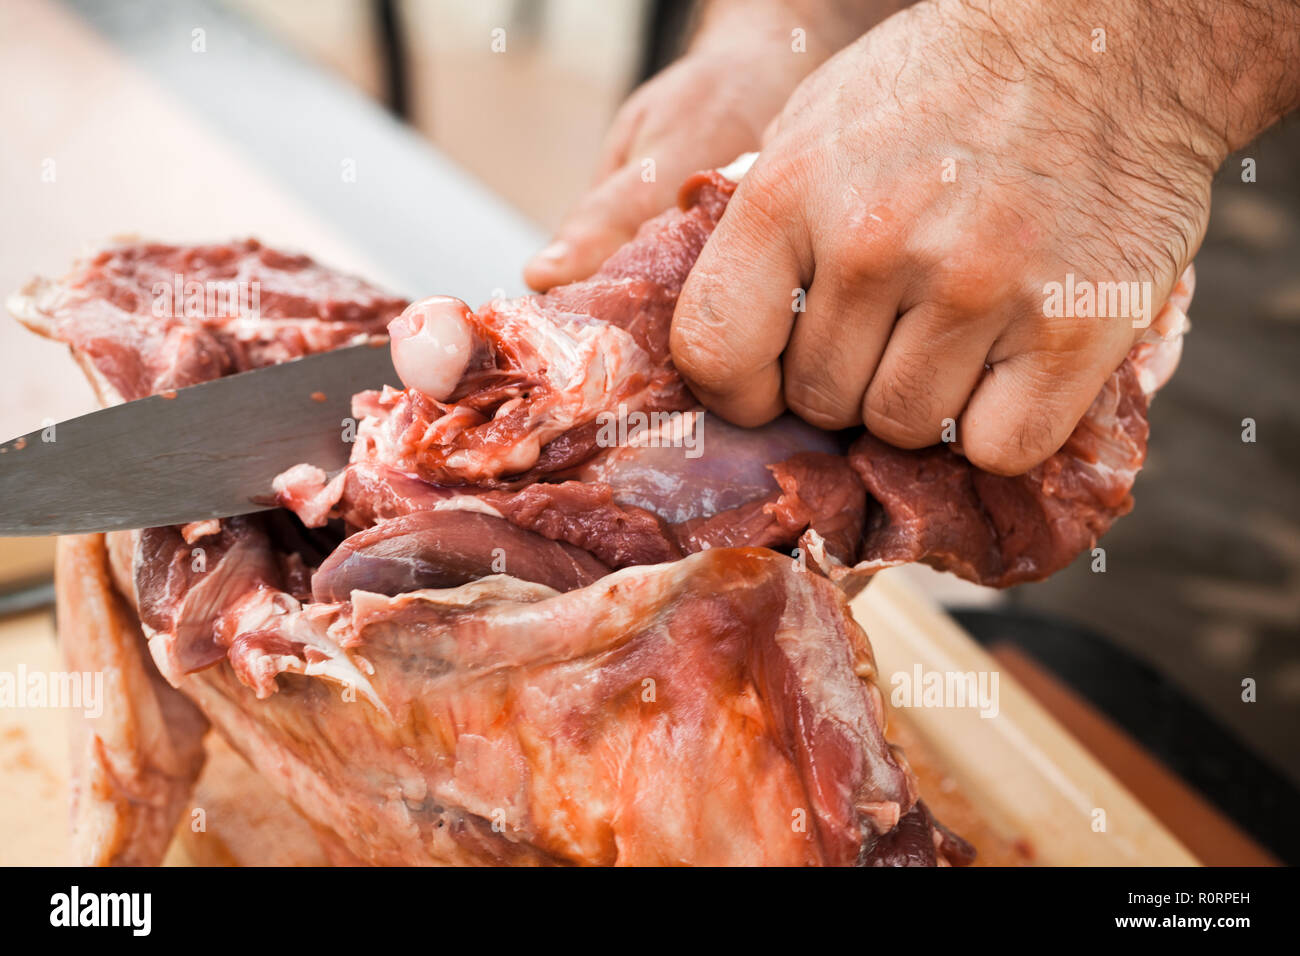 Raw lamb cutting, cook hands with knife, close-up photo, selective focus Stock Photo